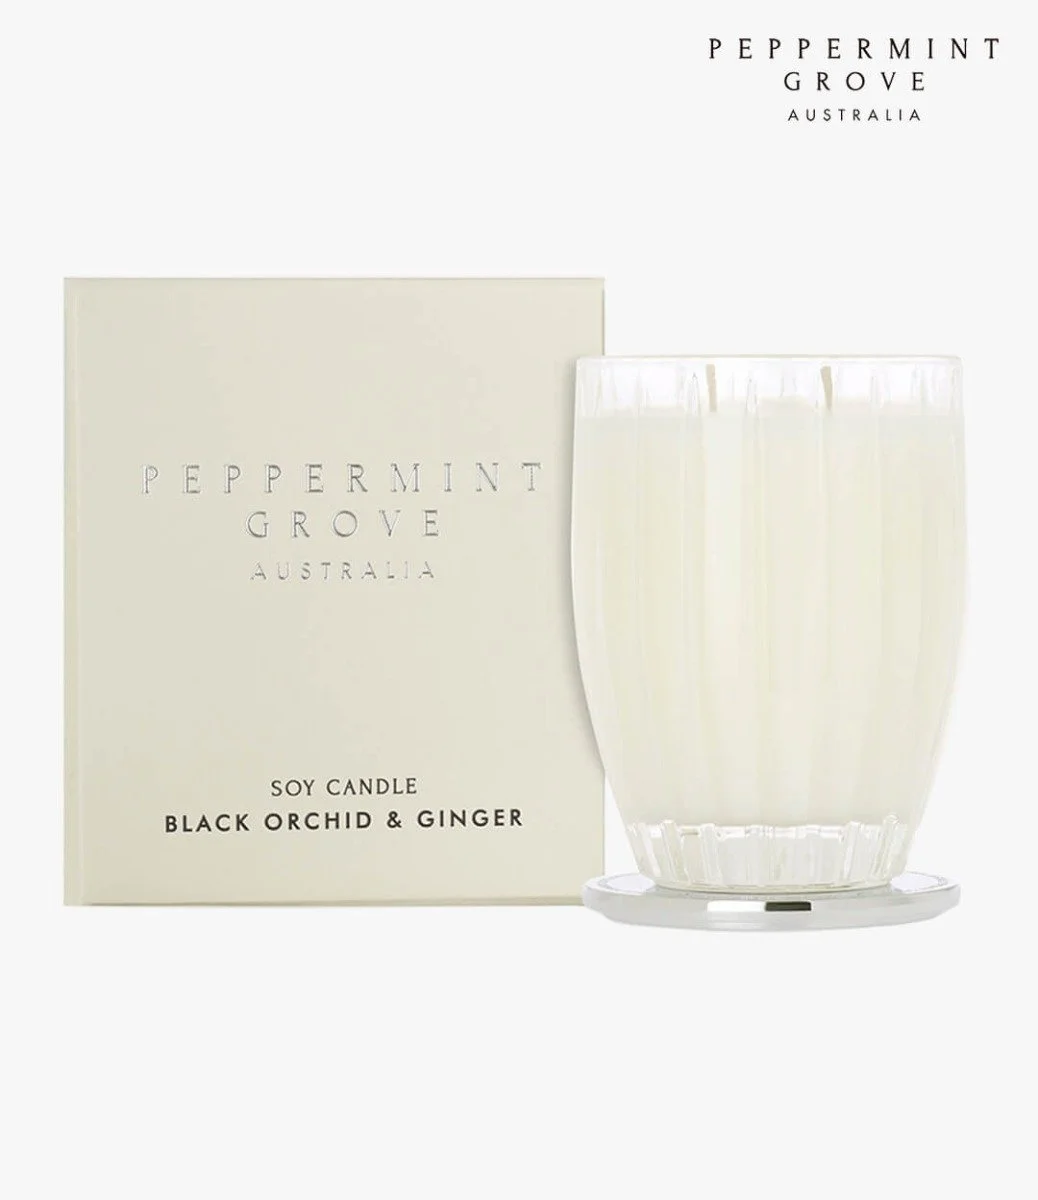 Black Orchid & Ginger 200g Candle